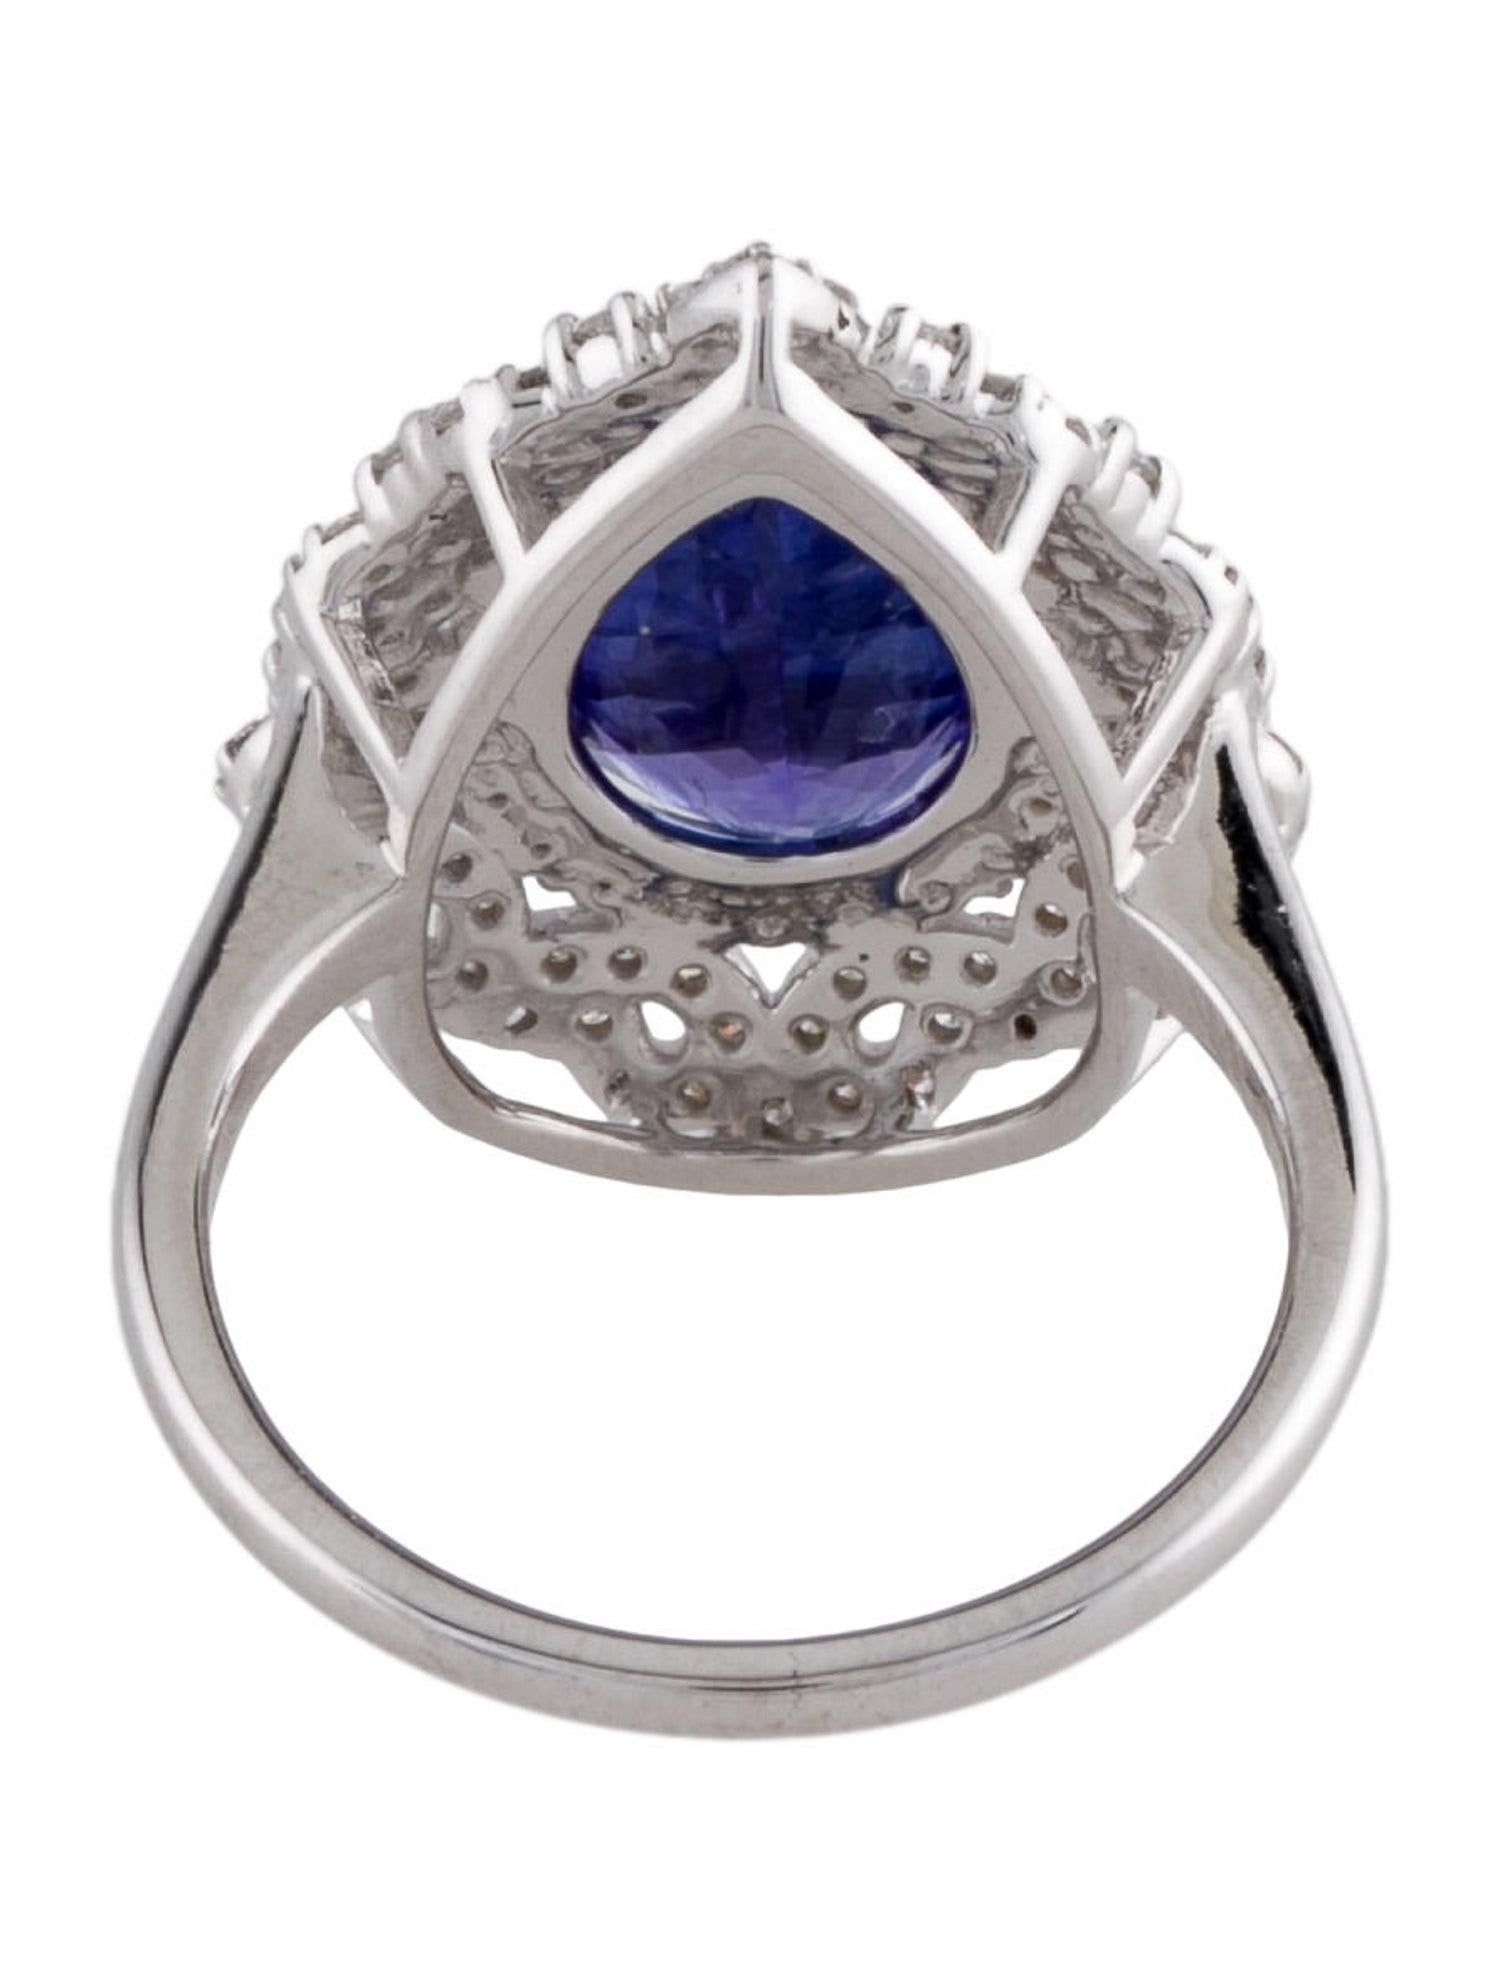 14K White Gold Pear Shaped Tanzanite & Diamond Cocktail Ring, 2.48ct In New Condition For Sale In Holtsville, NY